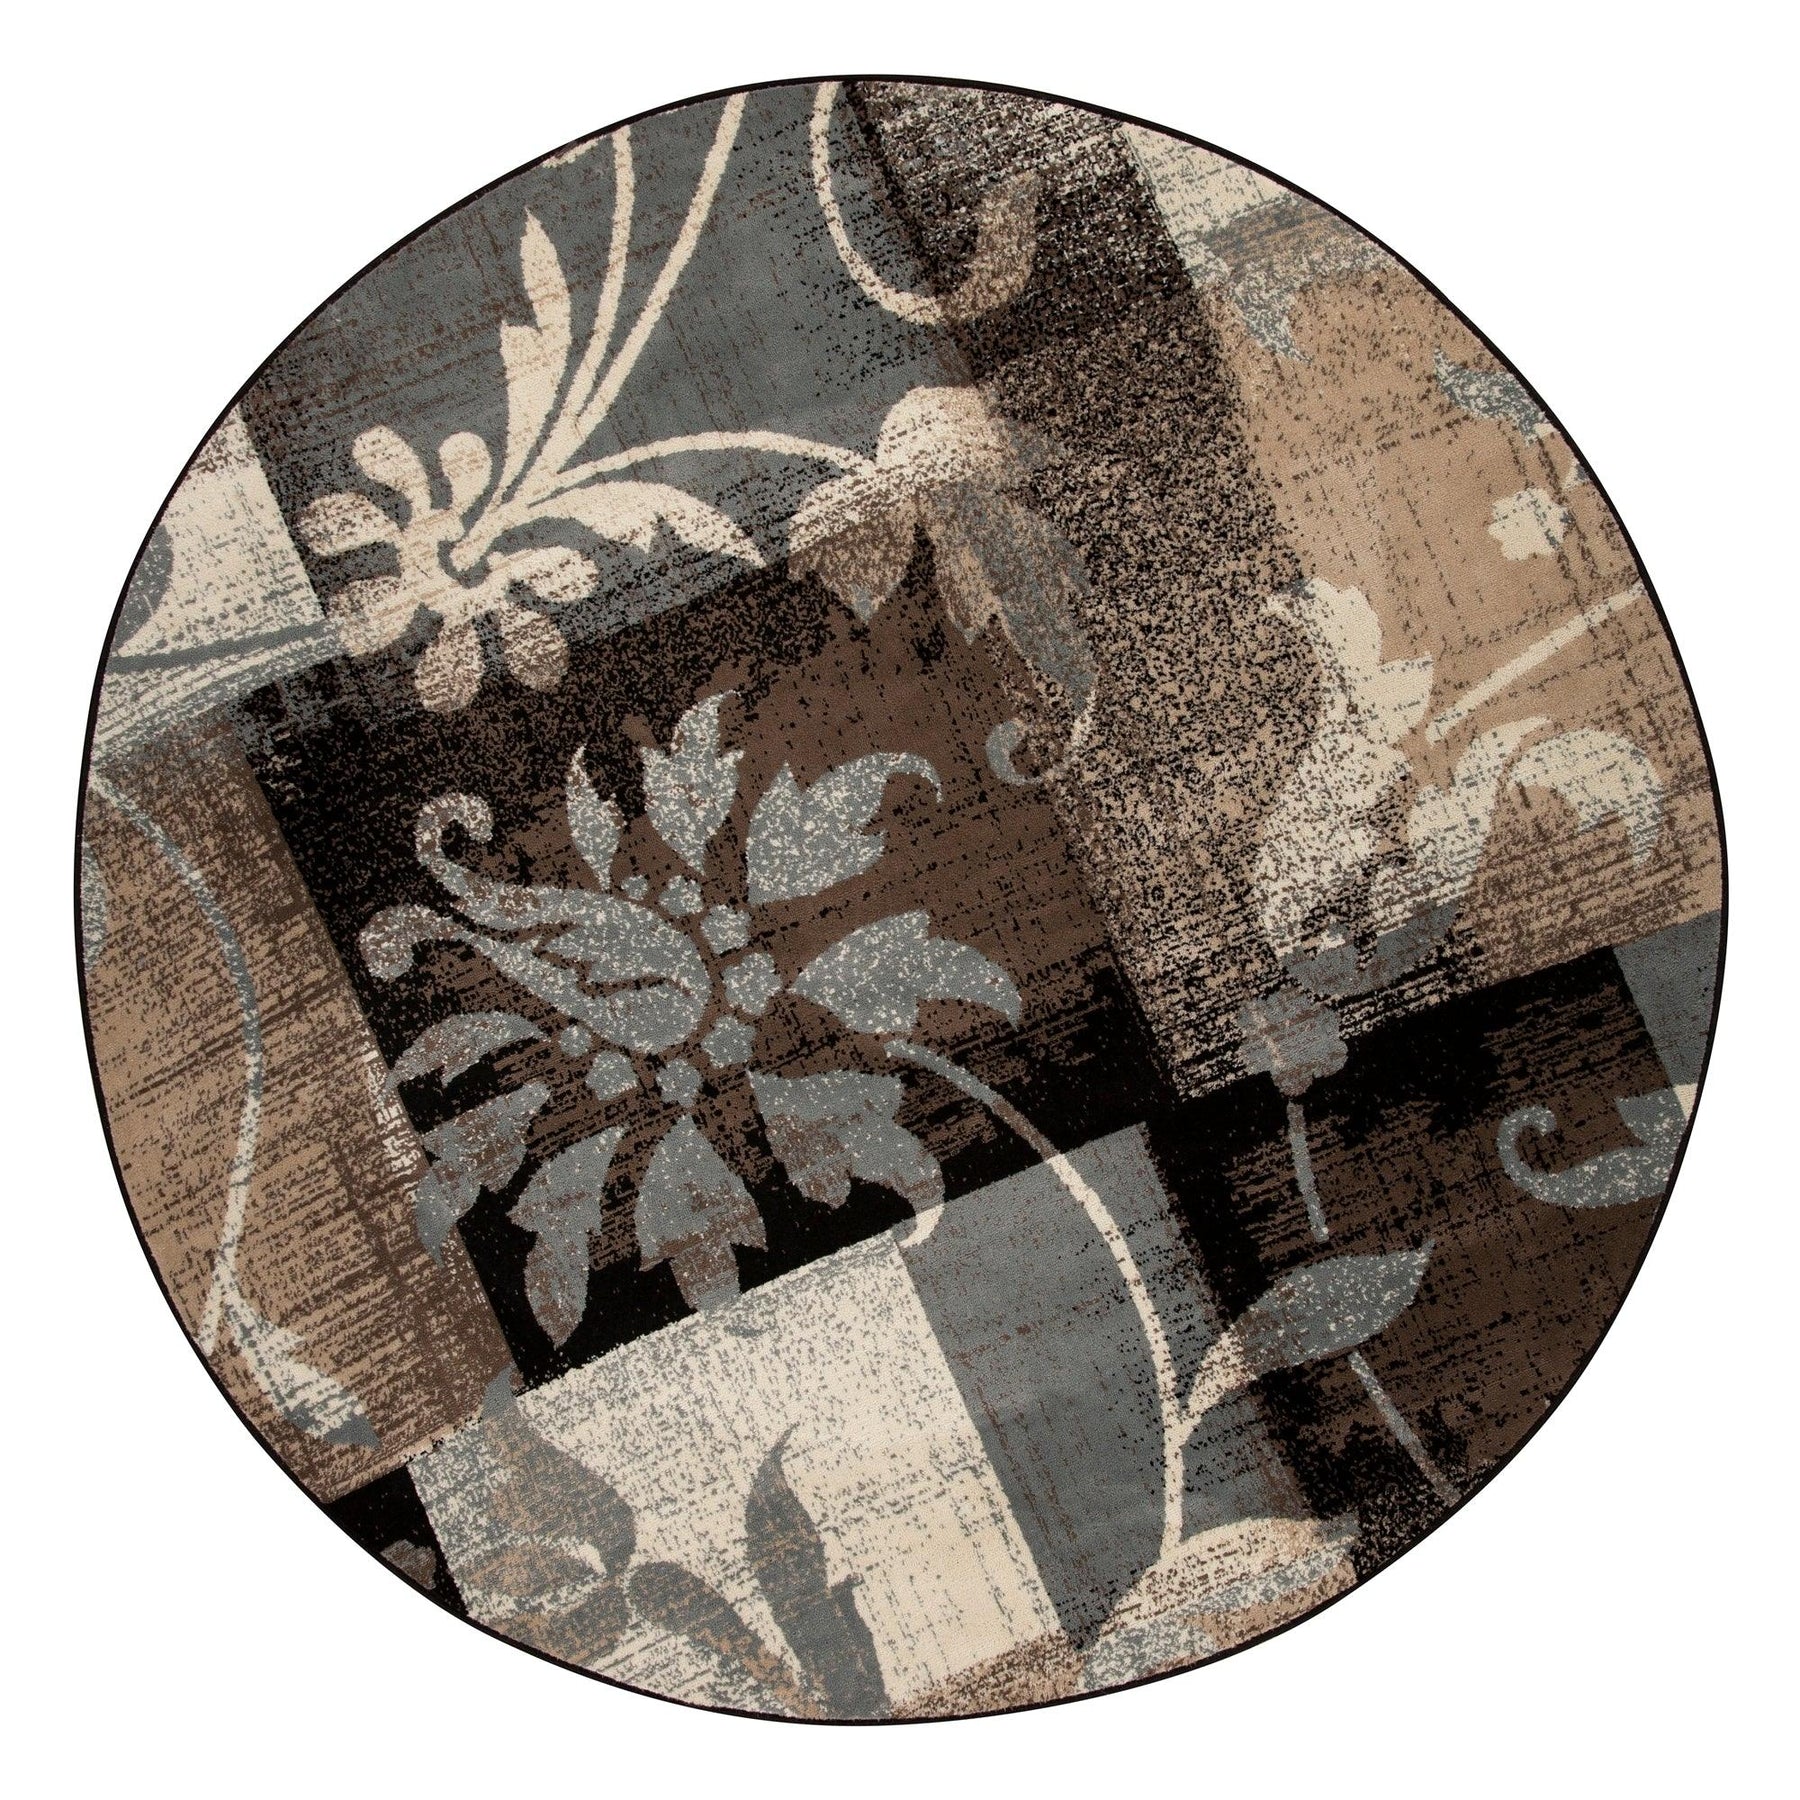 Pastiche Contemporary Floral Patchwork Area Rug-Rugs by Superior-Home City Inc